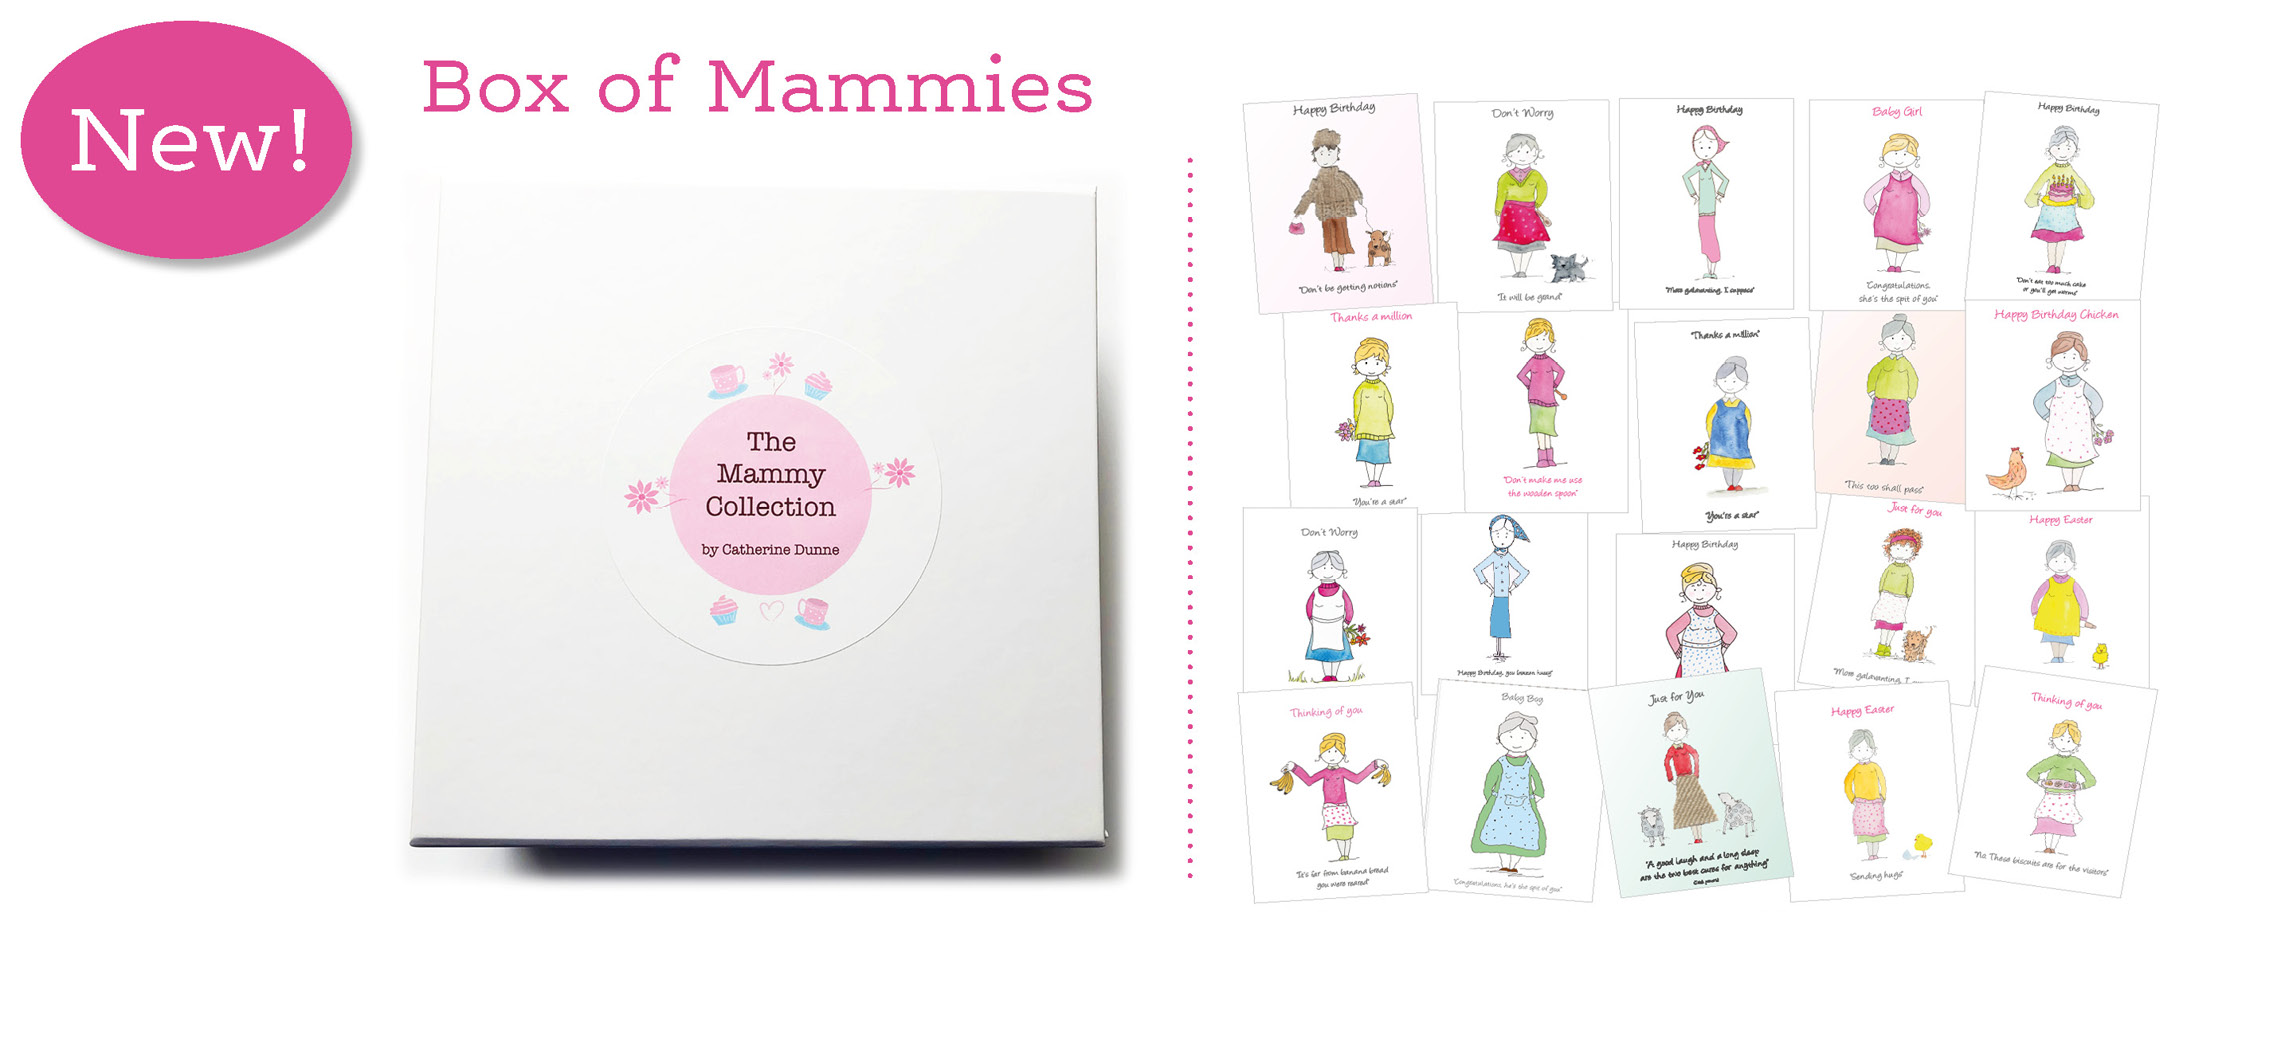 box of mammies by catherine dunne